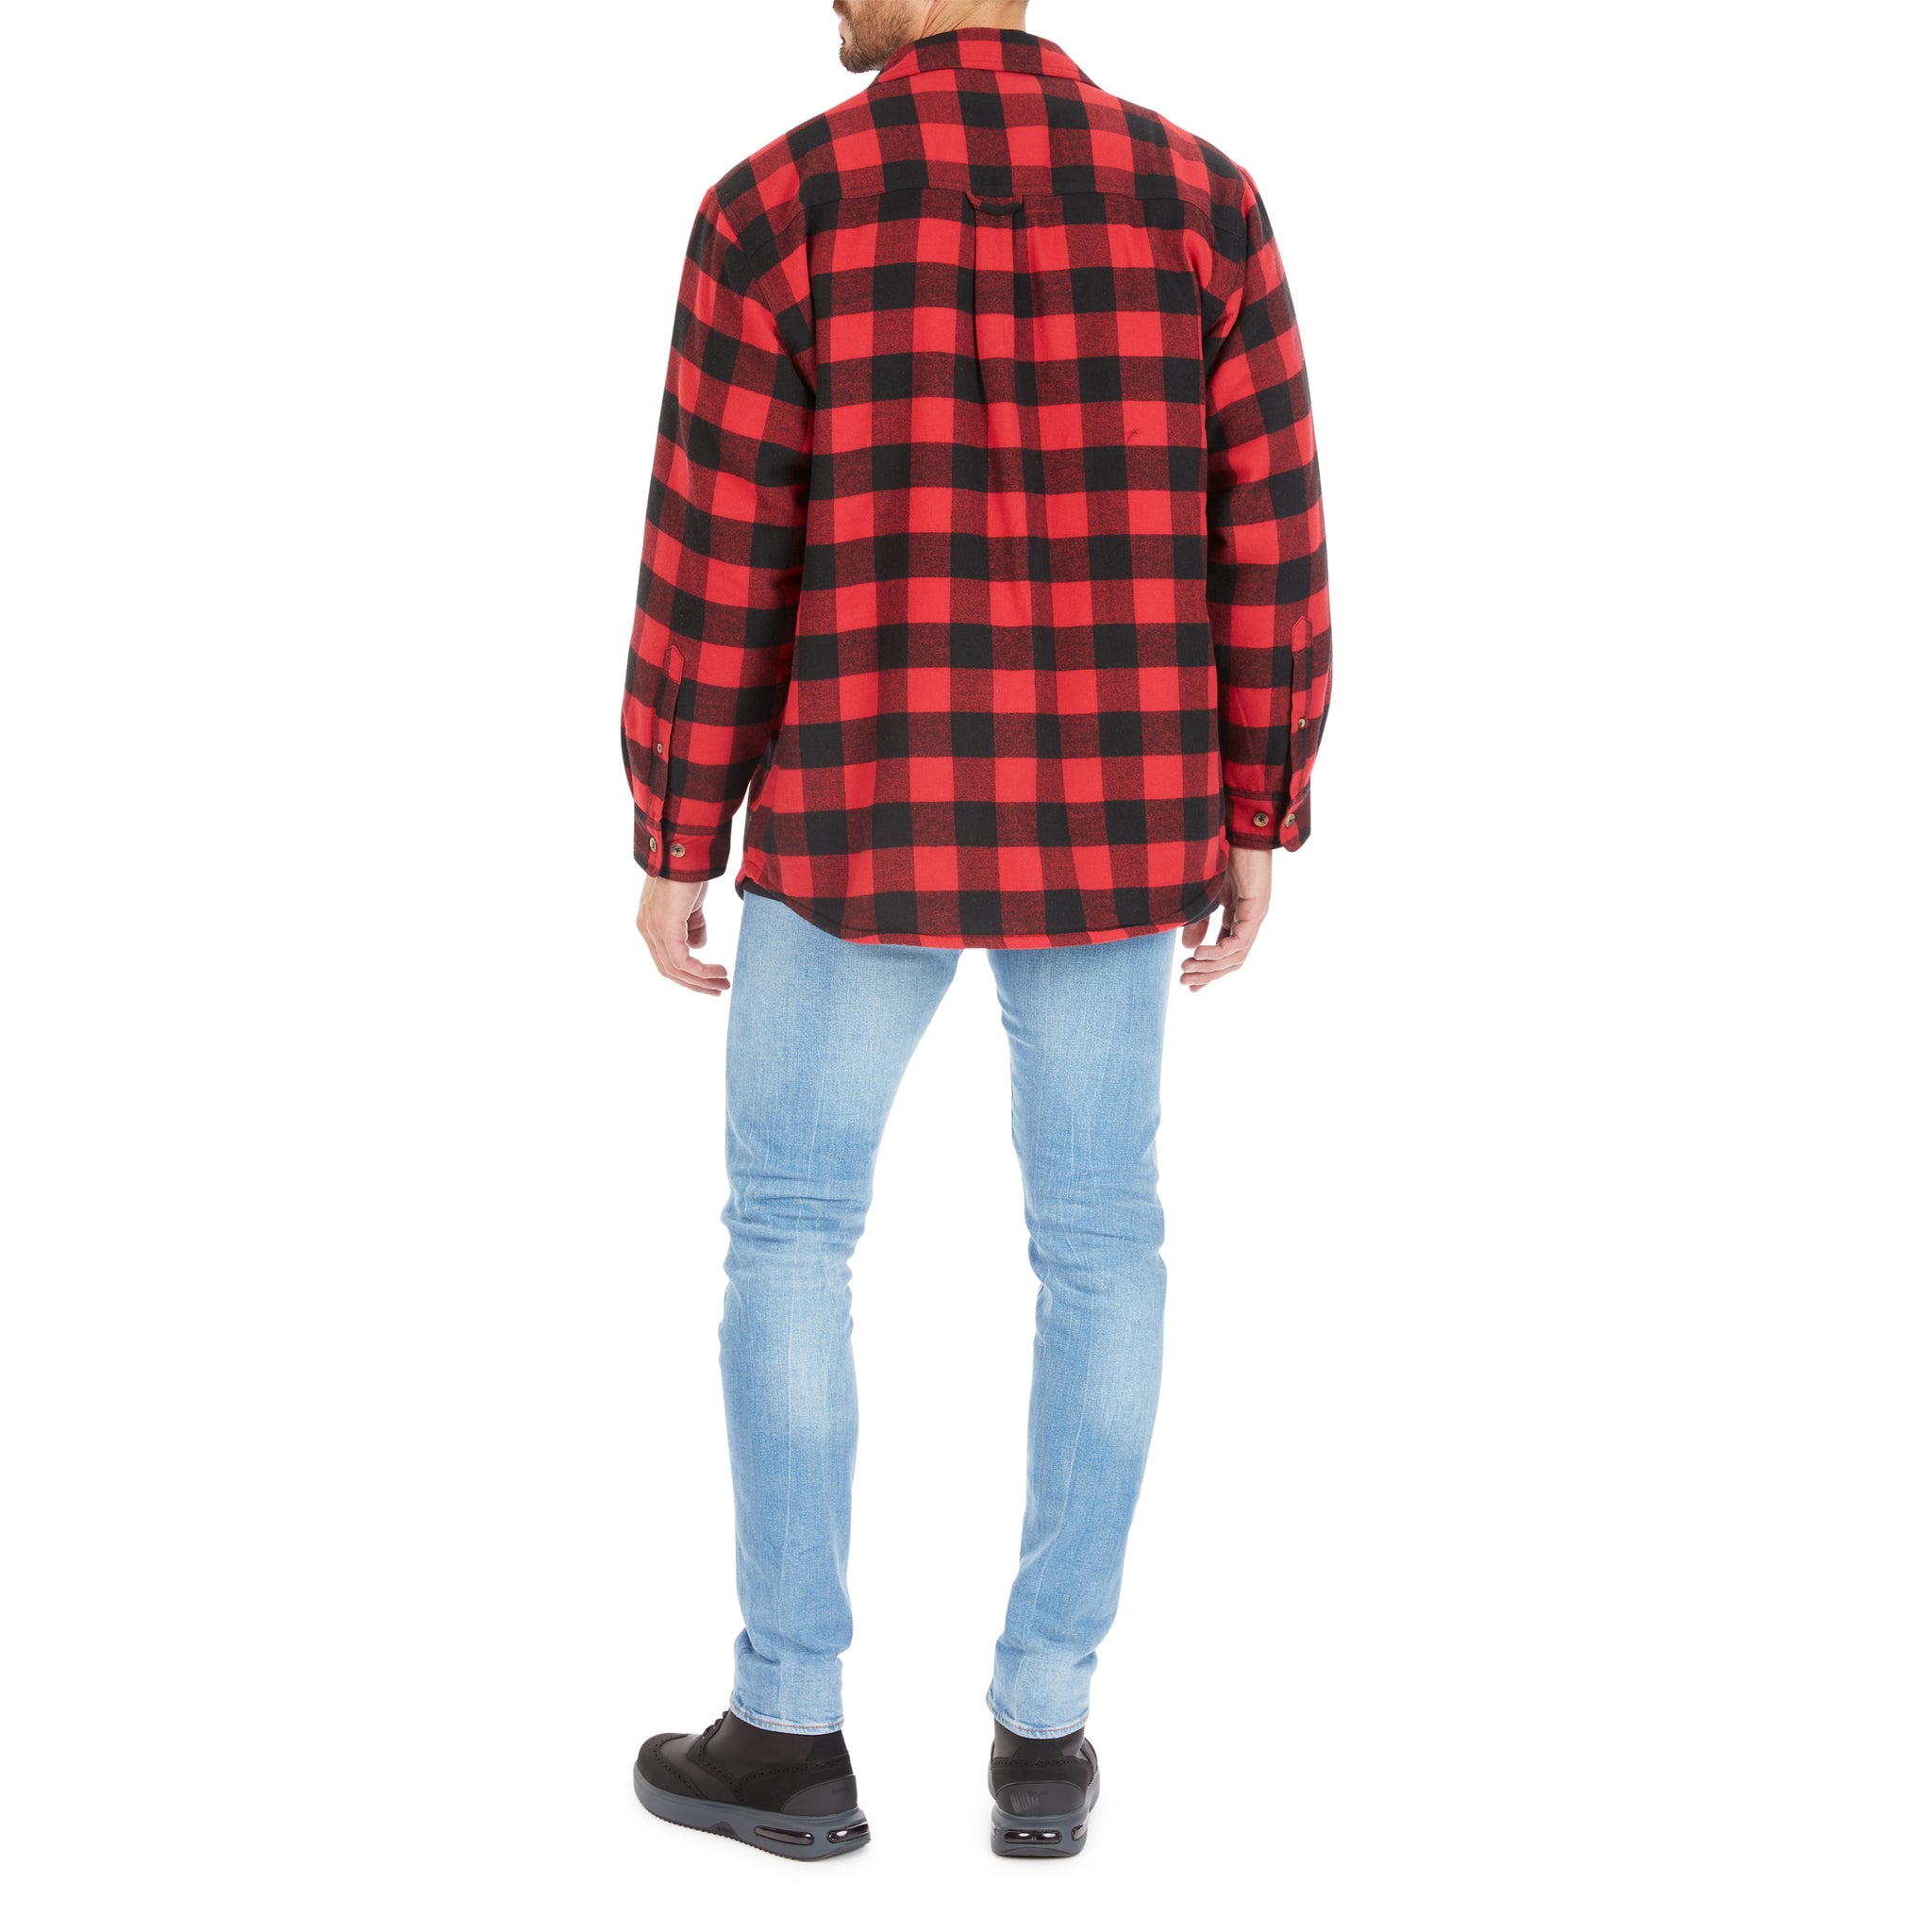 ZIP-FRONT SHERPA-LINED FLANNEL SHIRT JACKET